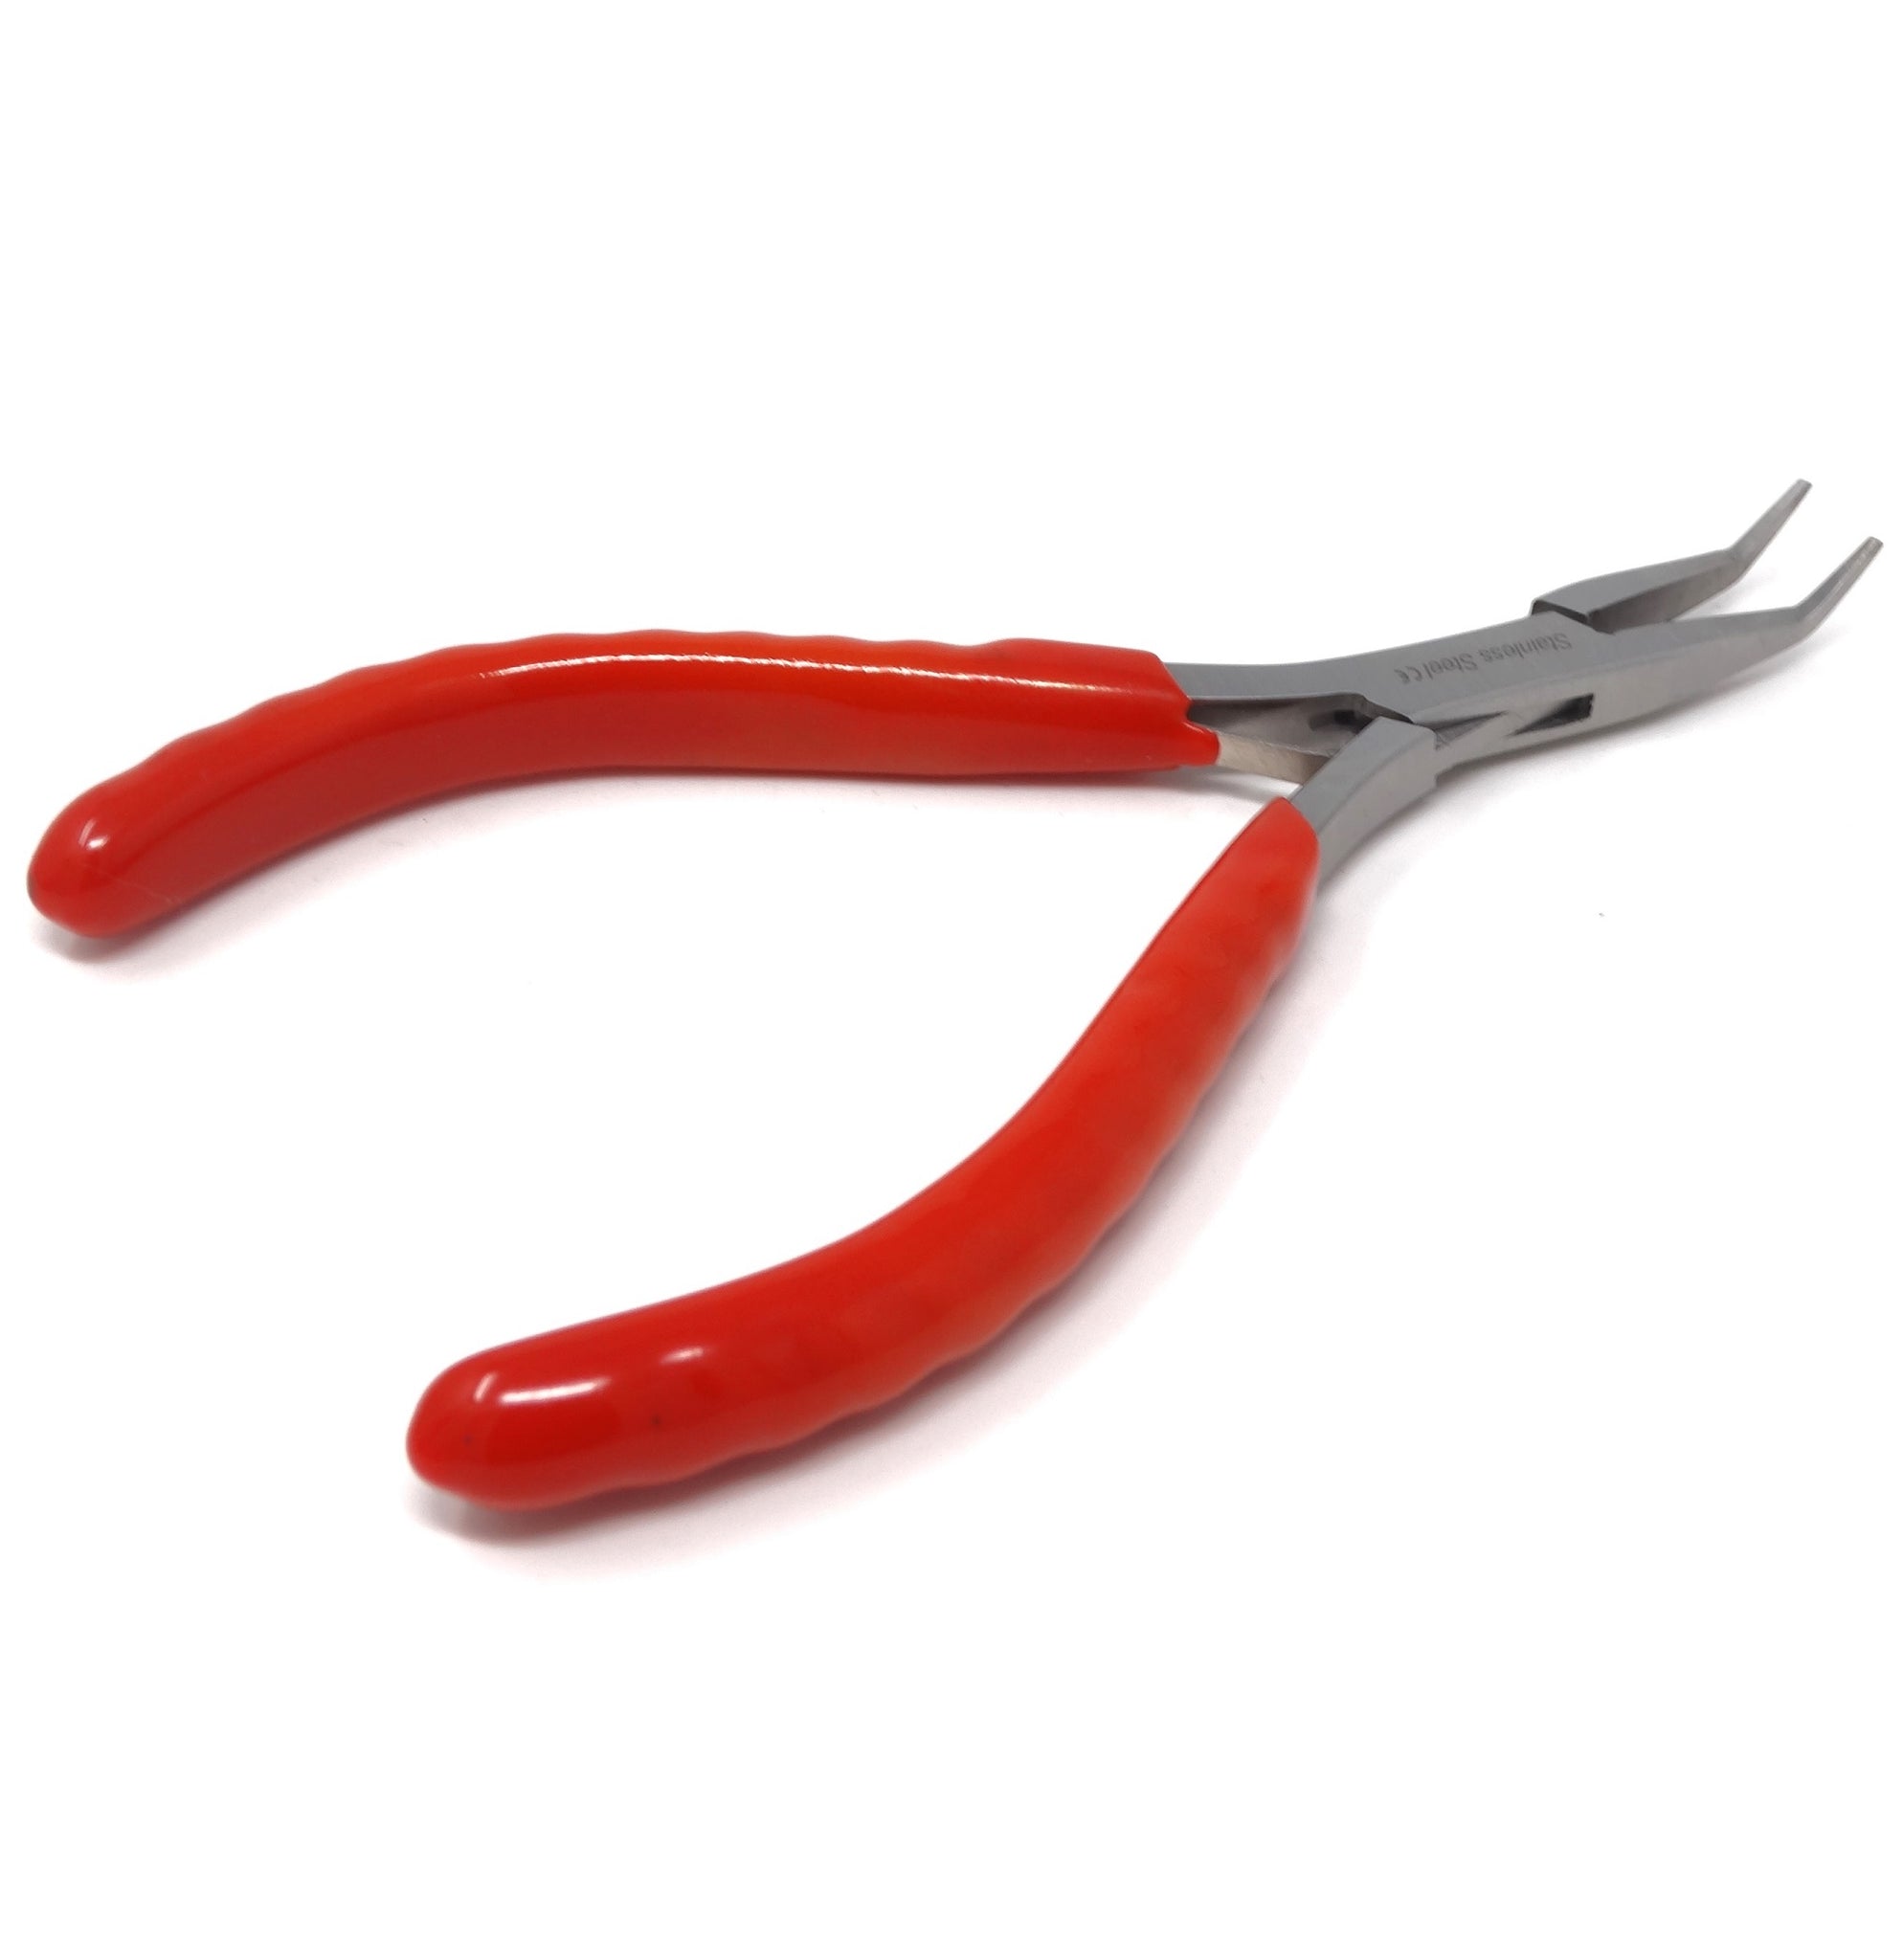  Stainless Steel Needle Nose Pliers